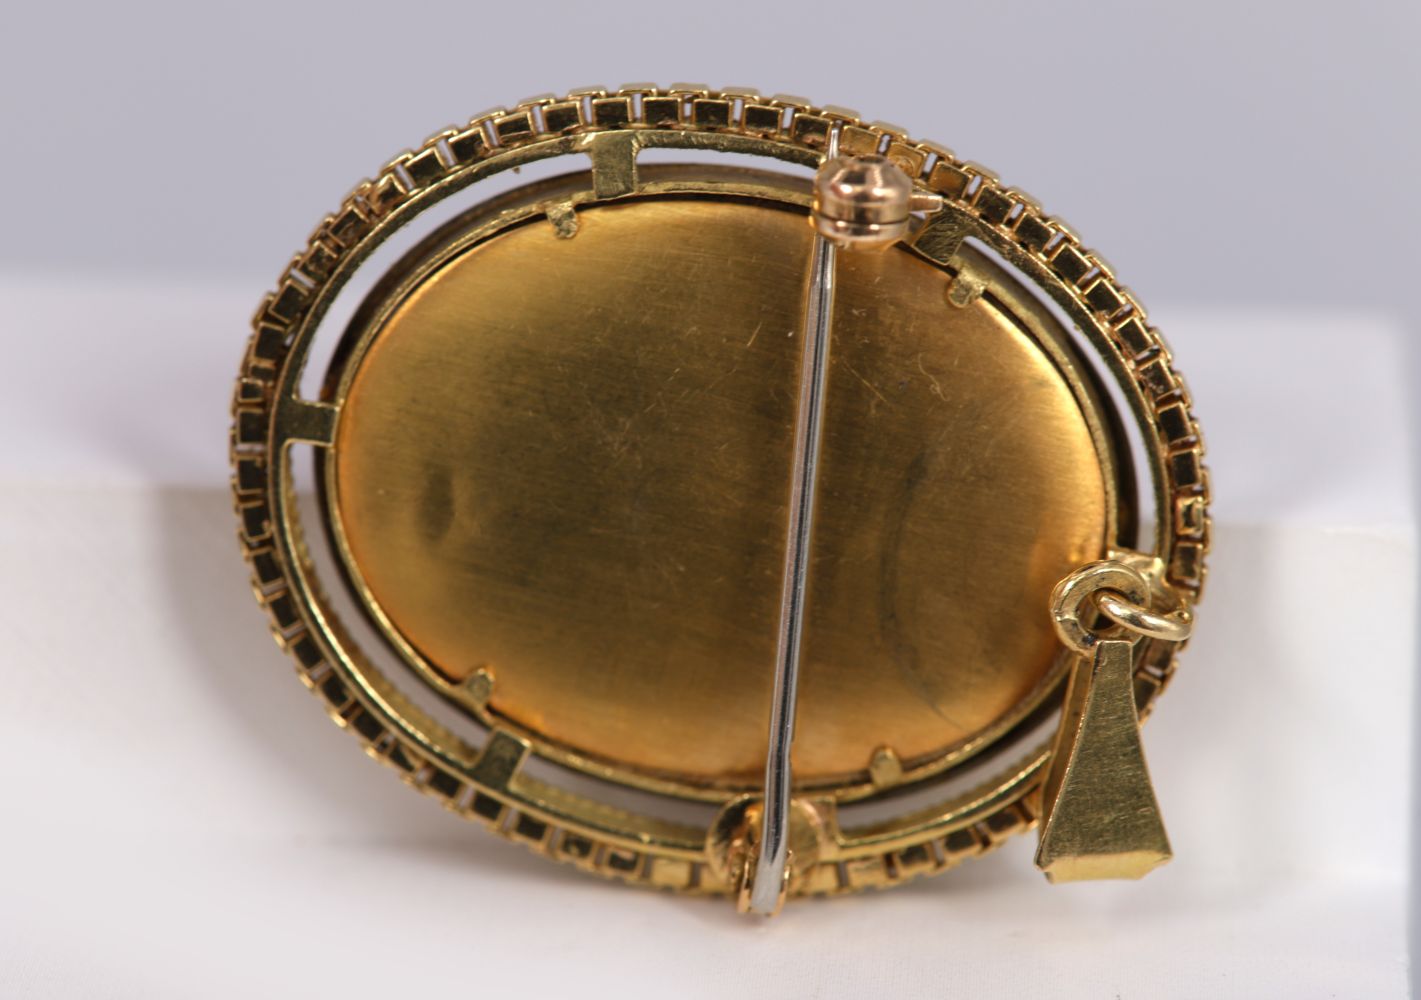 18K YELLOW GOLD OVAL PENDANT BROOCH - Image 3 of 3